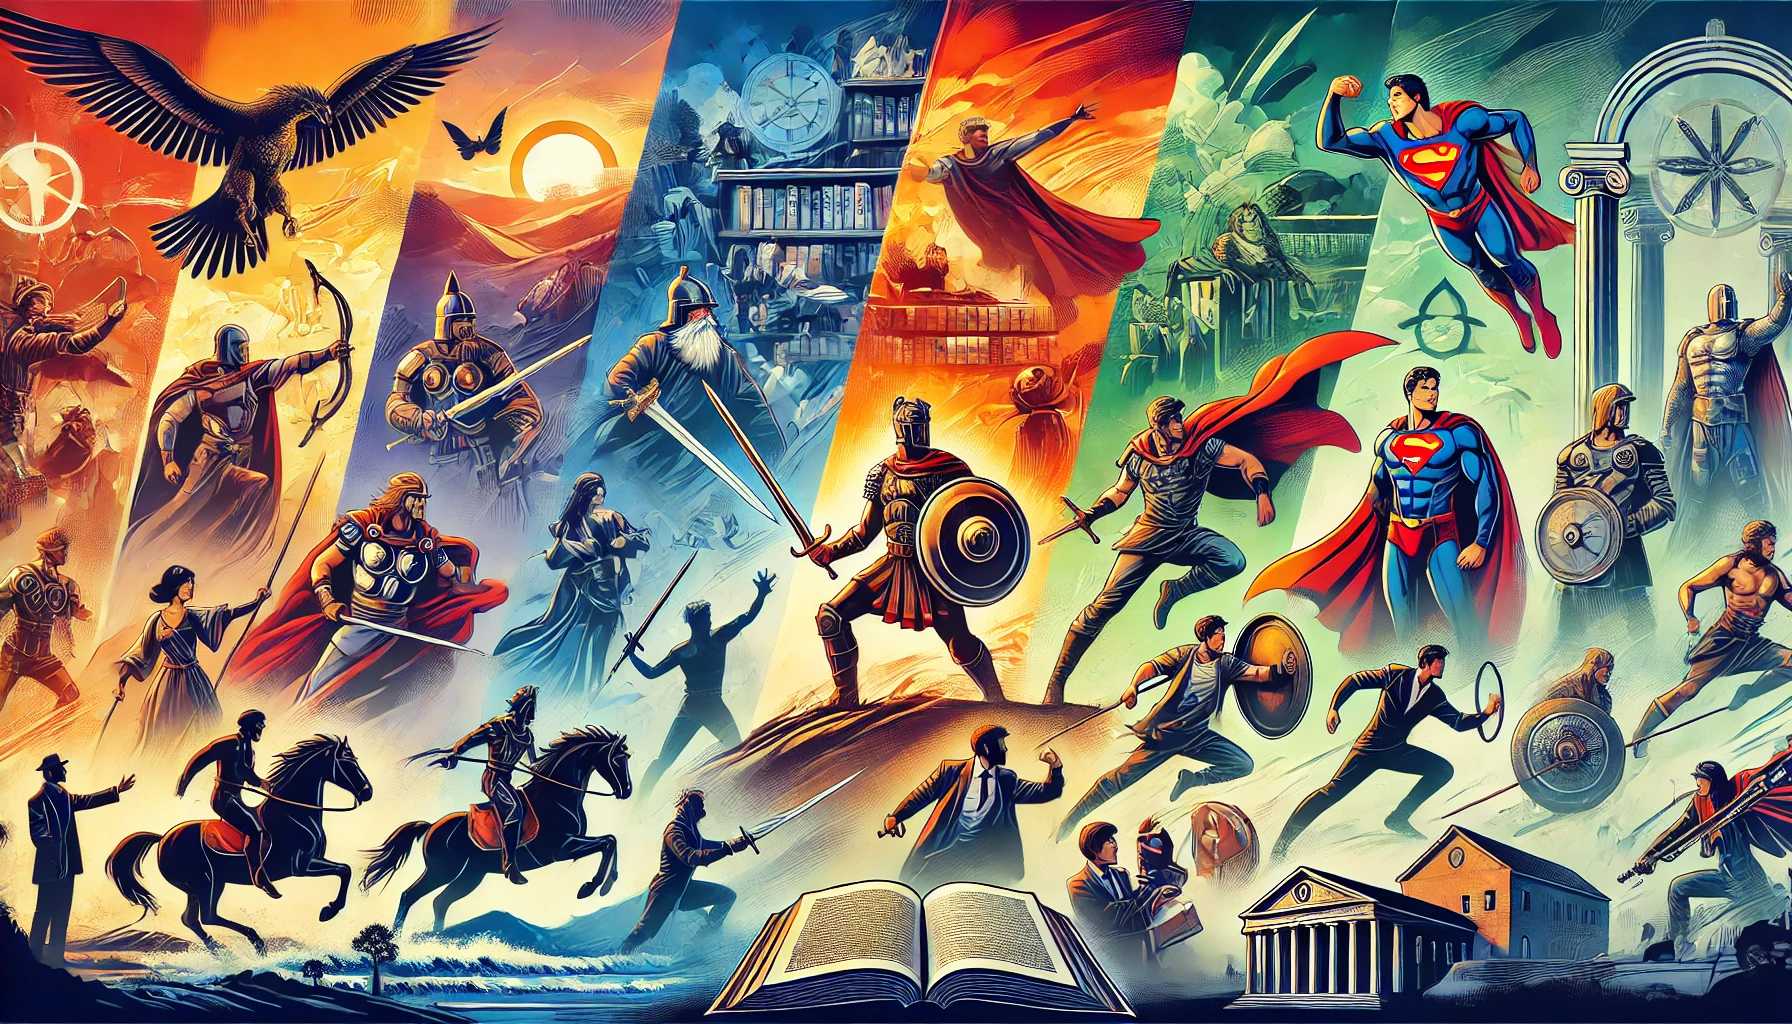 The evolution of the hero archetype in literature